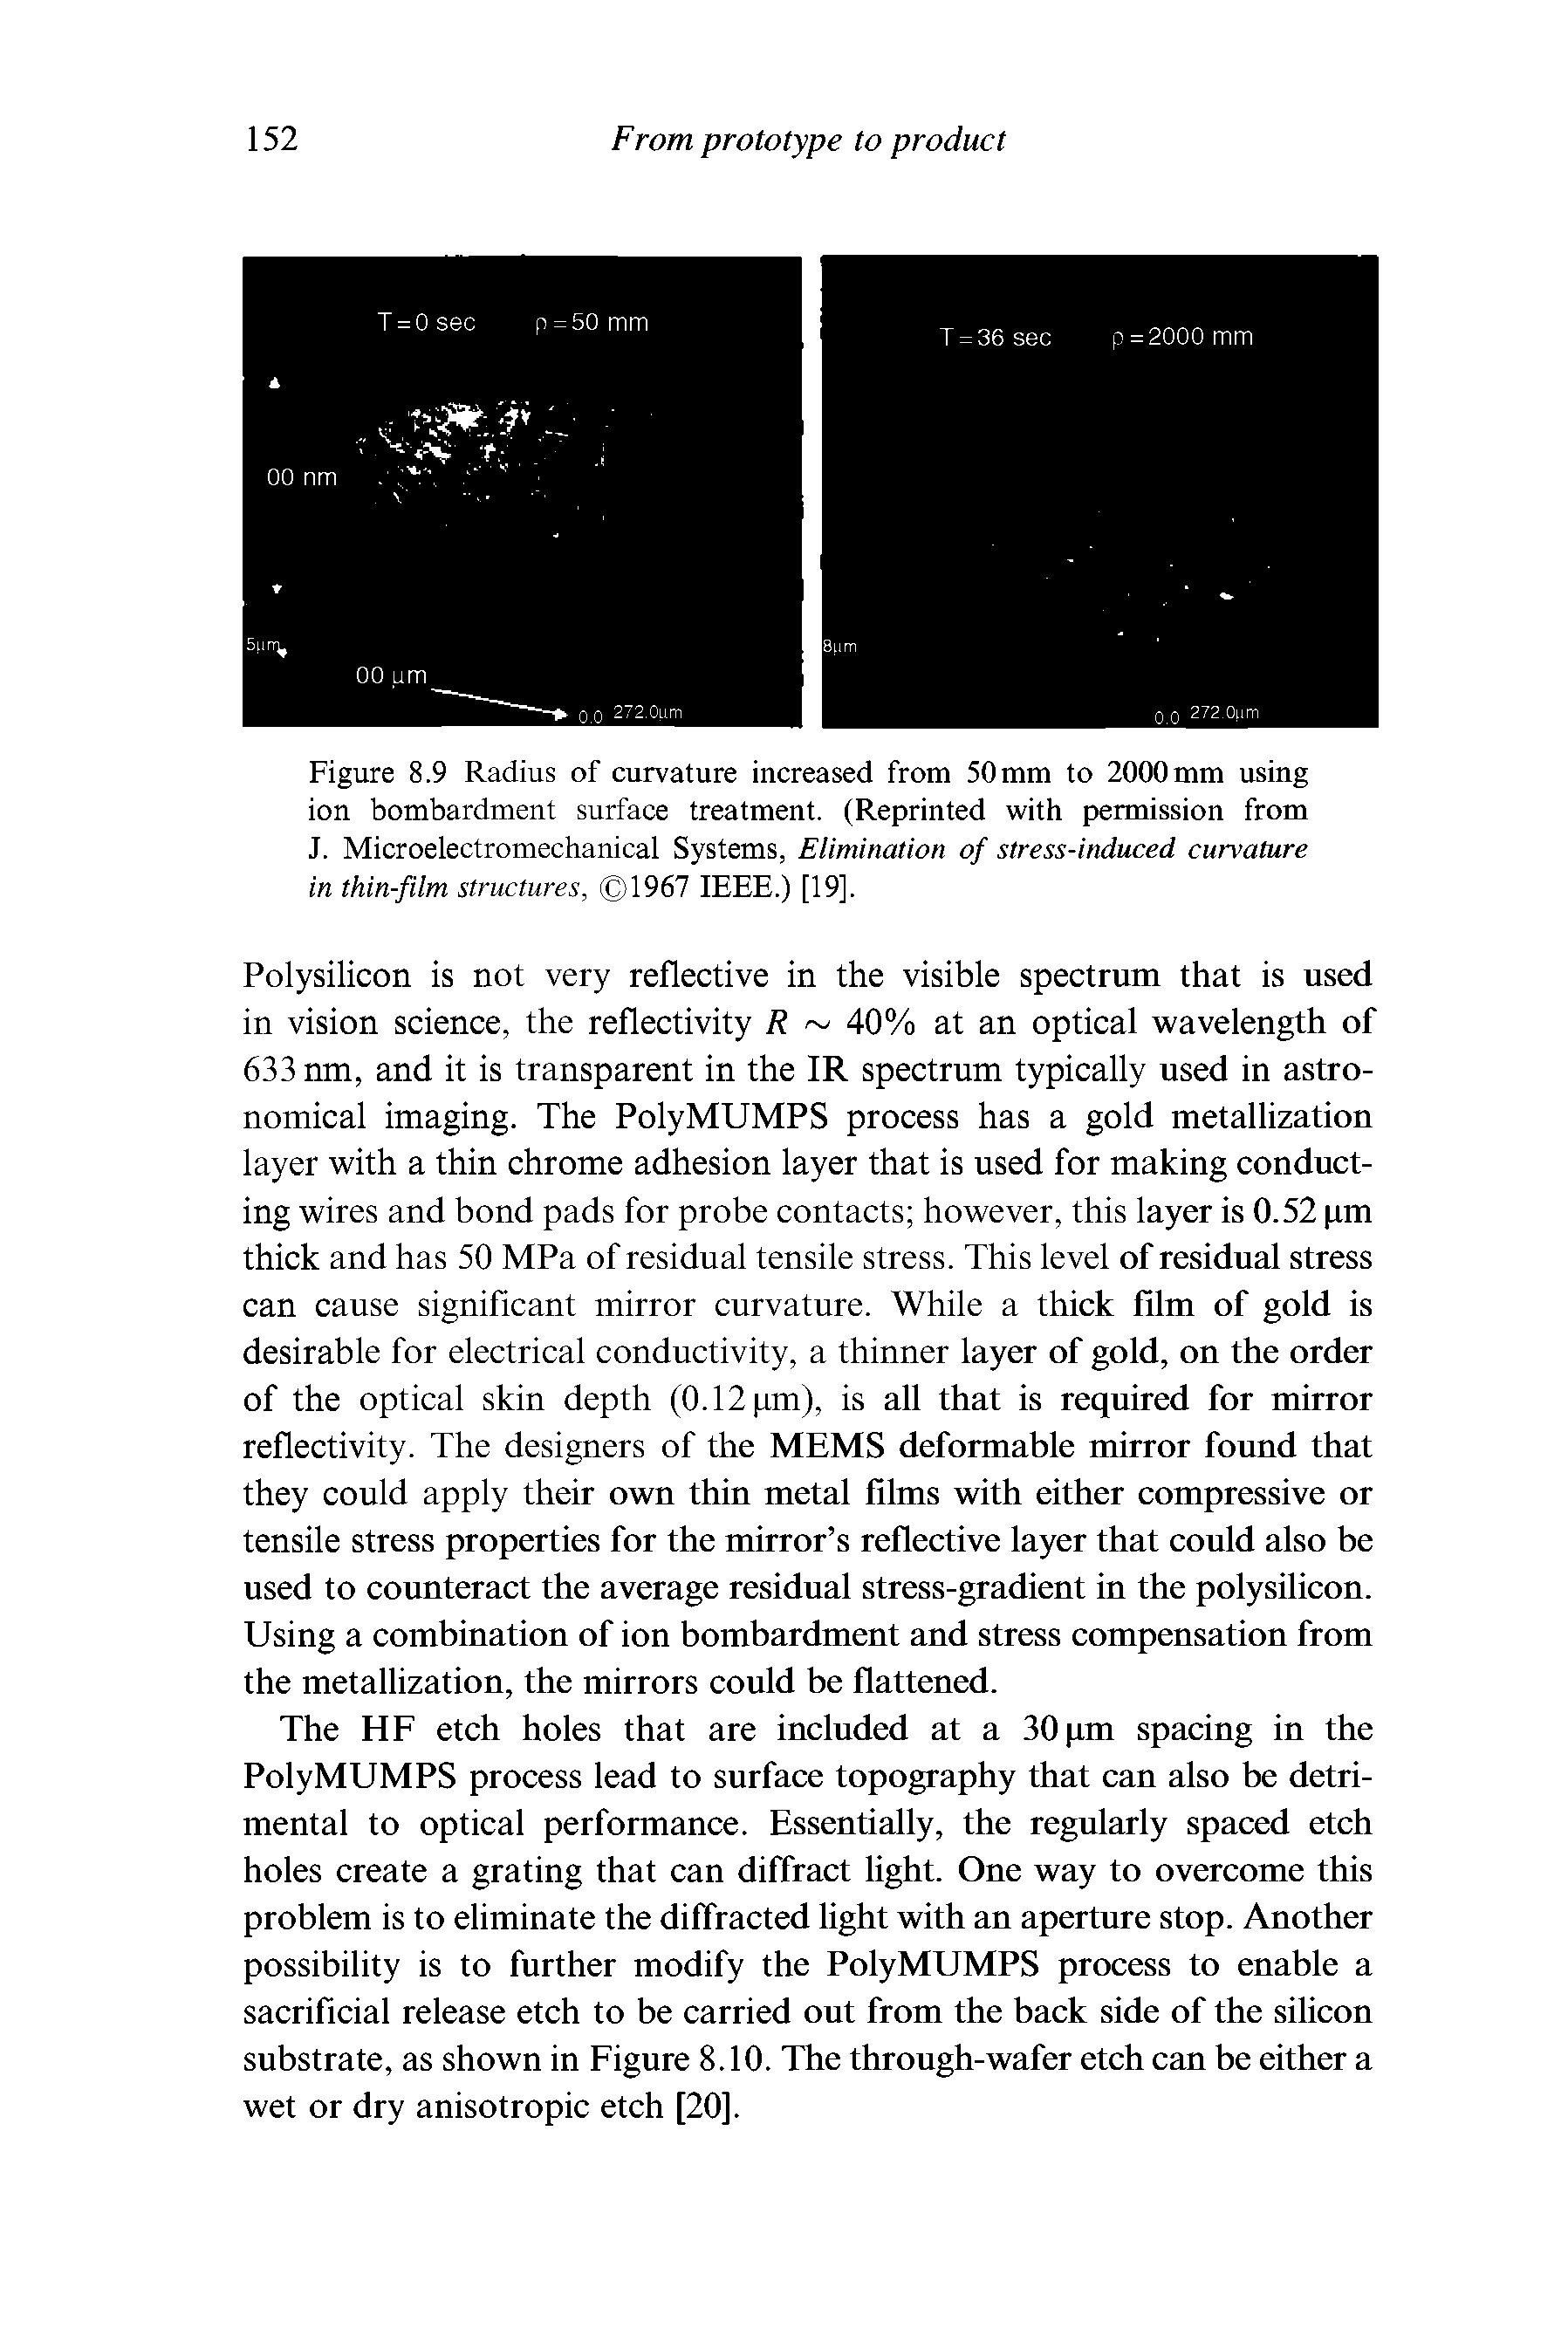 Figure 8.9 Radius of curvature increased from 50mm to 2000mm using ion bombardment surface treatment. (Reprinted with permission from J. Microelectromechanical Systems, Elimination of stress-induced curvature in thin-film structures, 1967 IEEE.) [19].